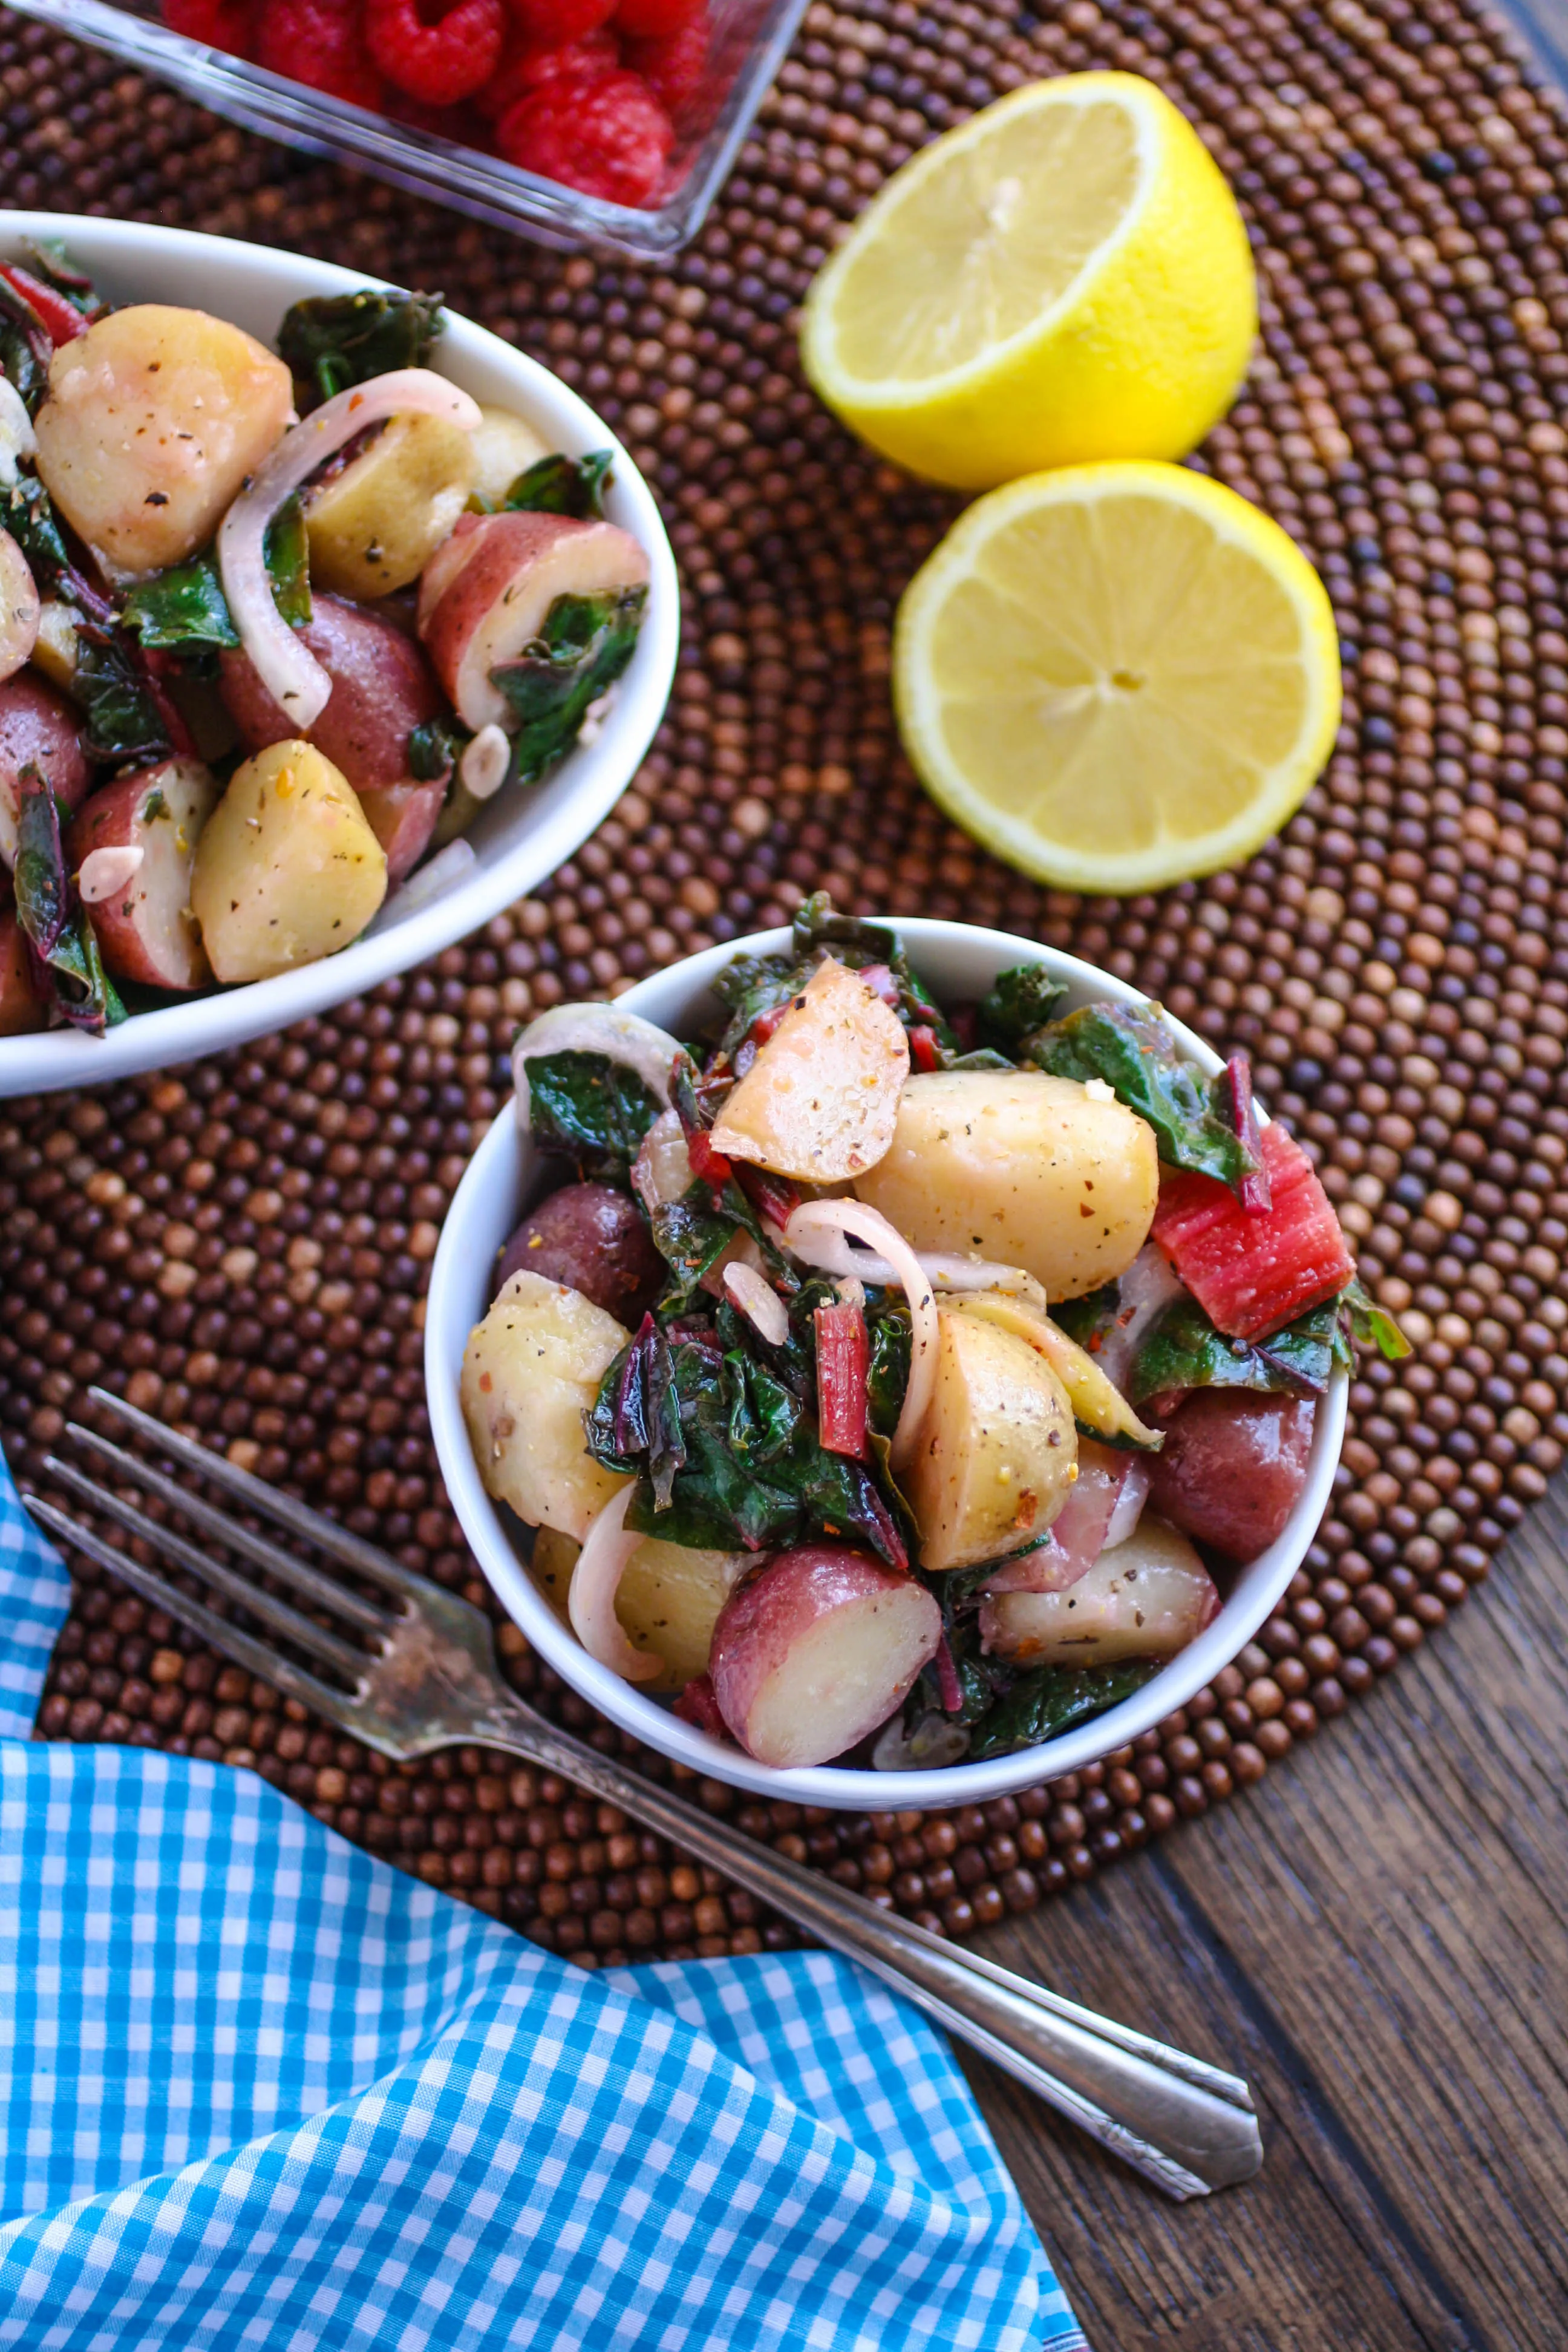 Italian Potato Salad with Swiss Chard is a side dish you'll want to dig into! This is perfect for any get together!